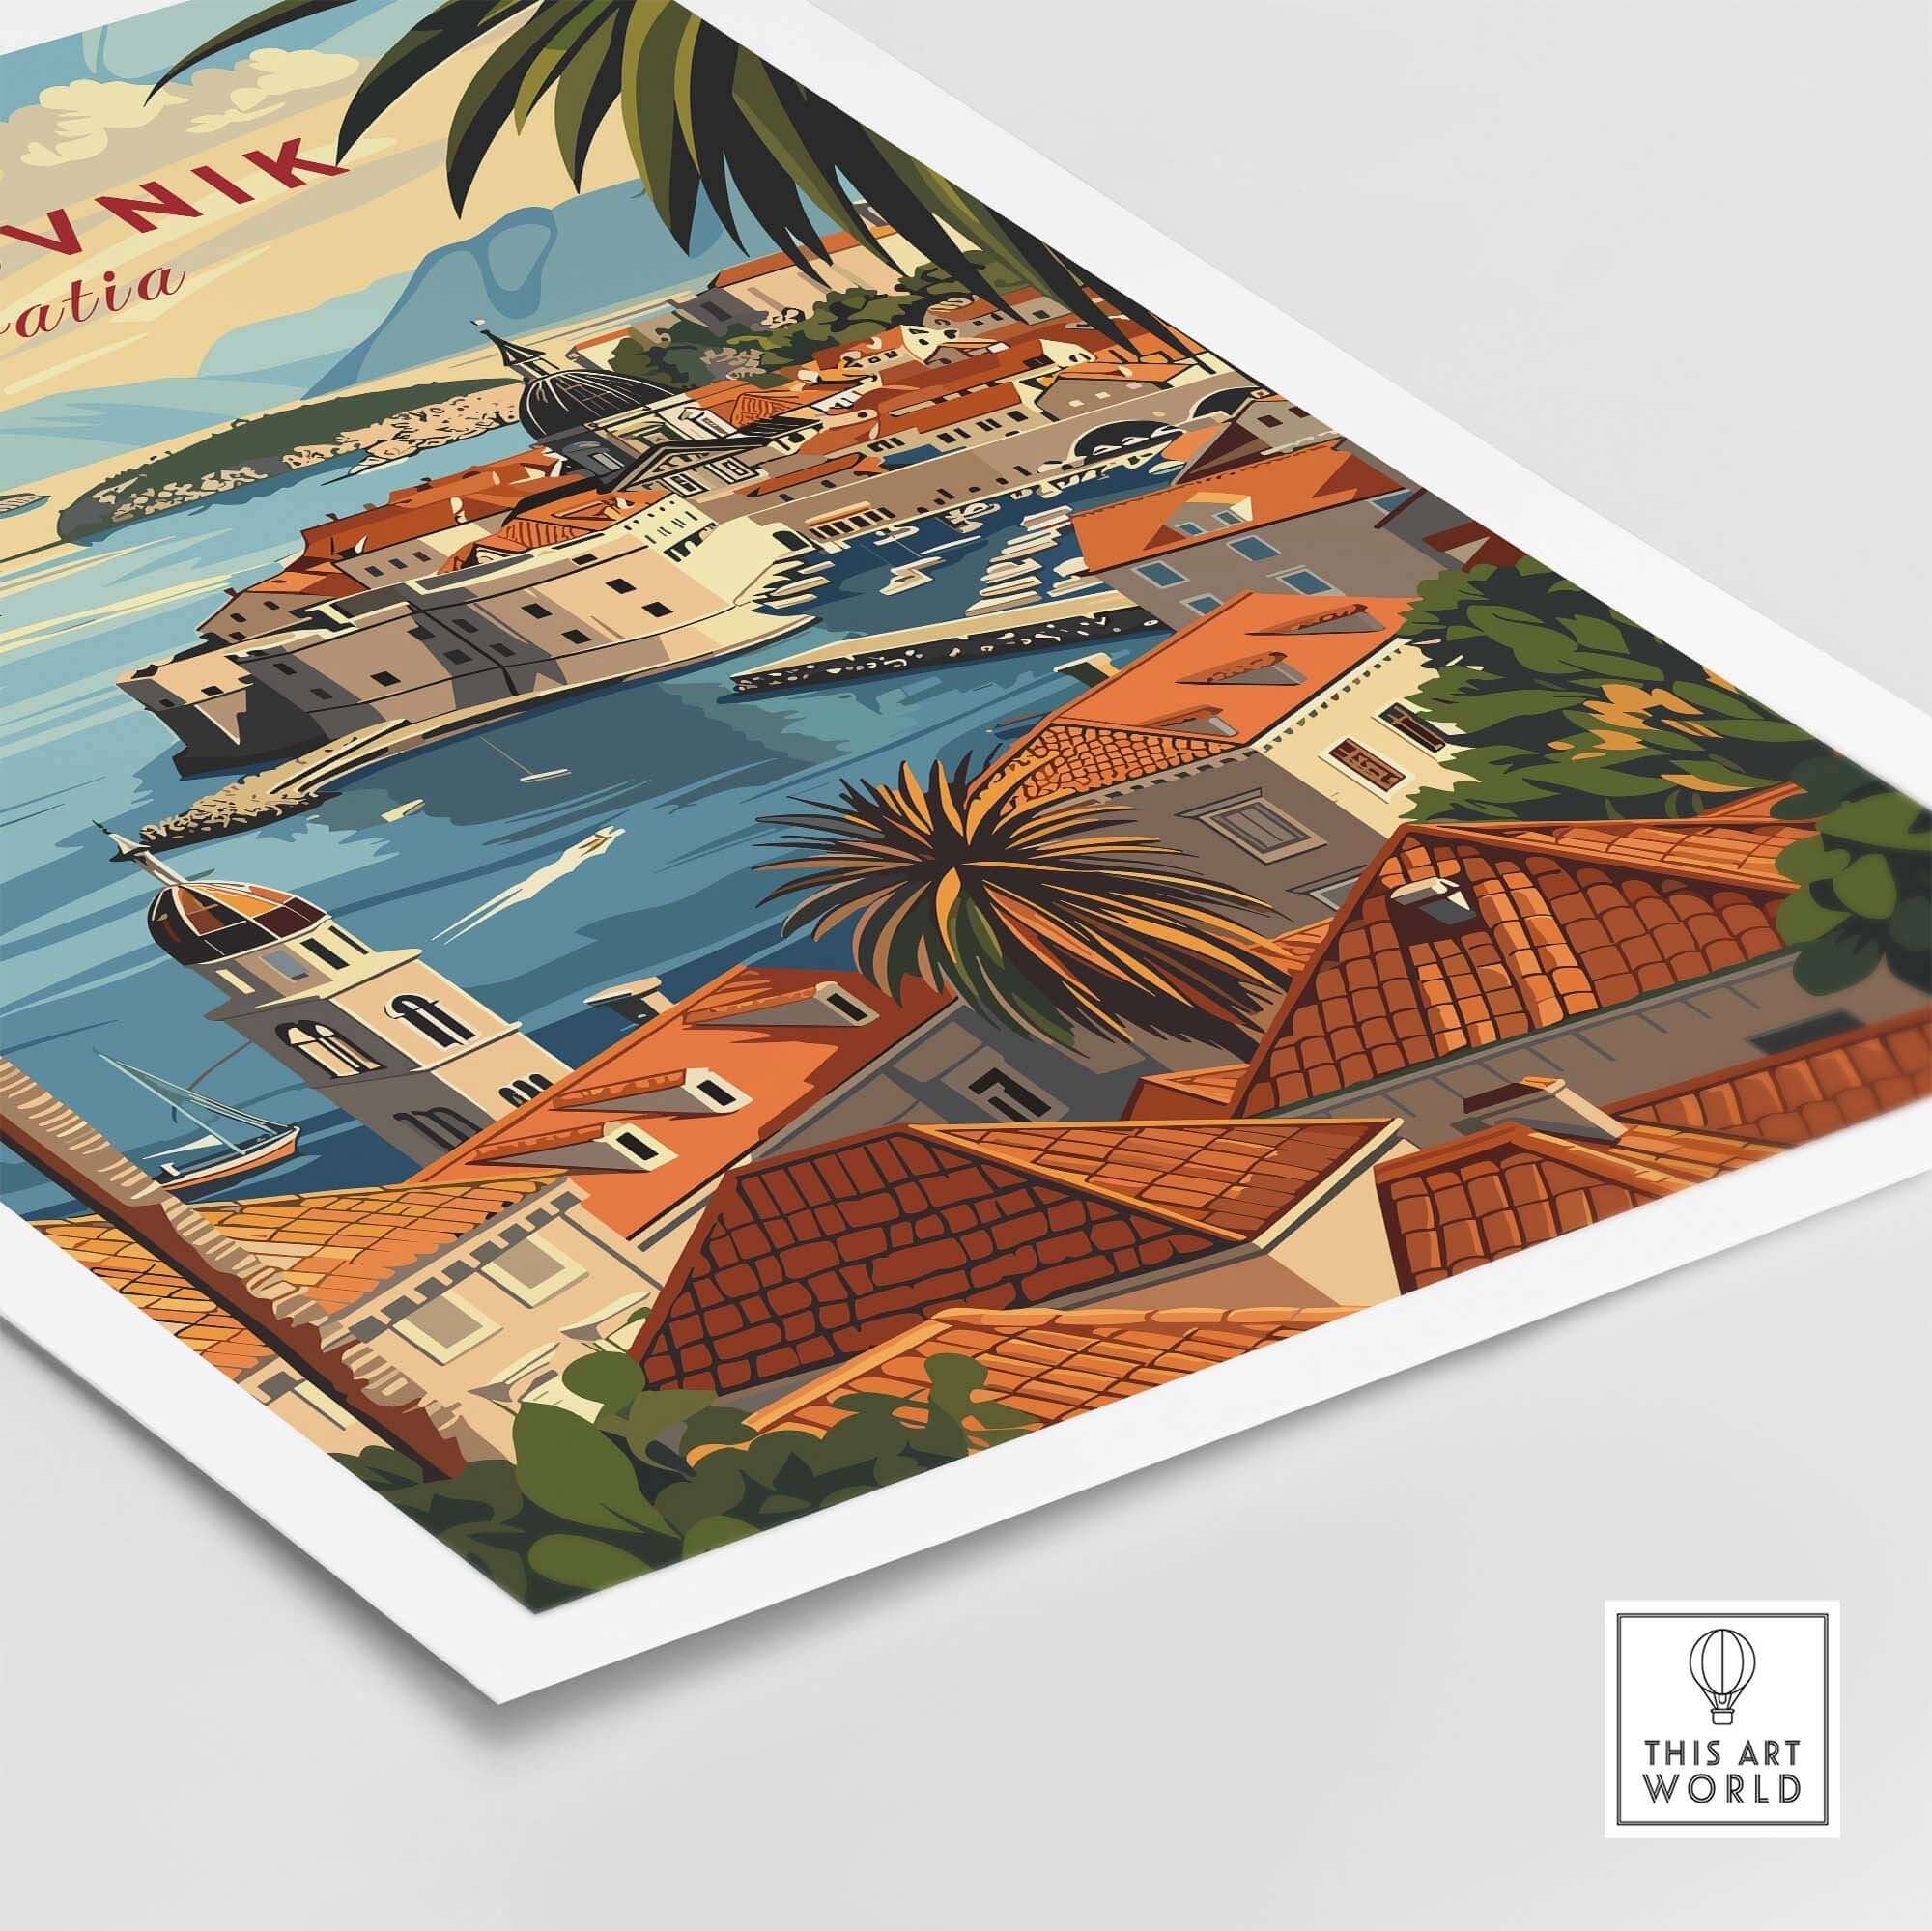 Dubrovnik Poster view our best collection or travel posters and prints - ThisArtWorld